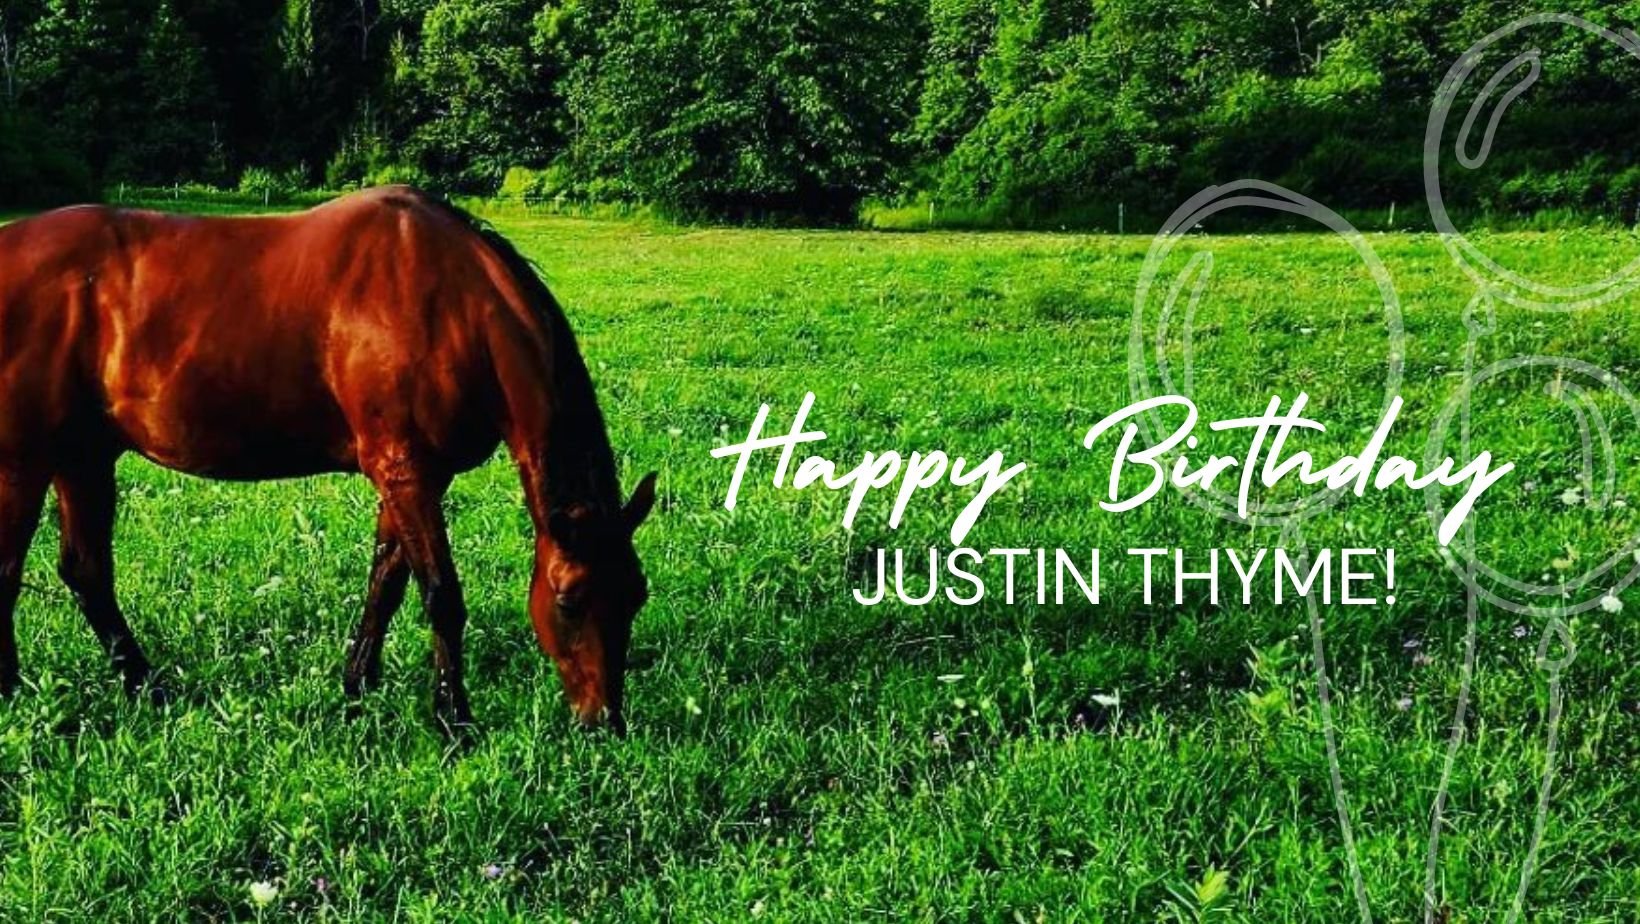 Justin Thyme is turning 24 this Thursday, May 9 🎈 We're starting the celebration a few days early with a fundraiser to help cover the costs of his care for the coming months. Consider donating $24 to celebrate his 24 years! Link in our bio ❤️